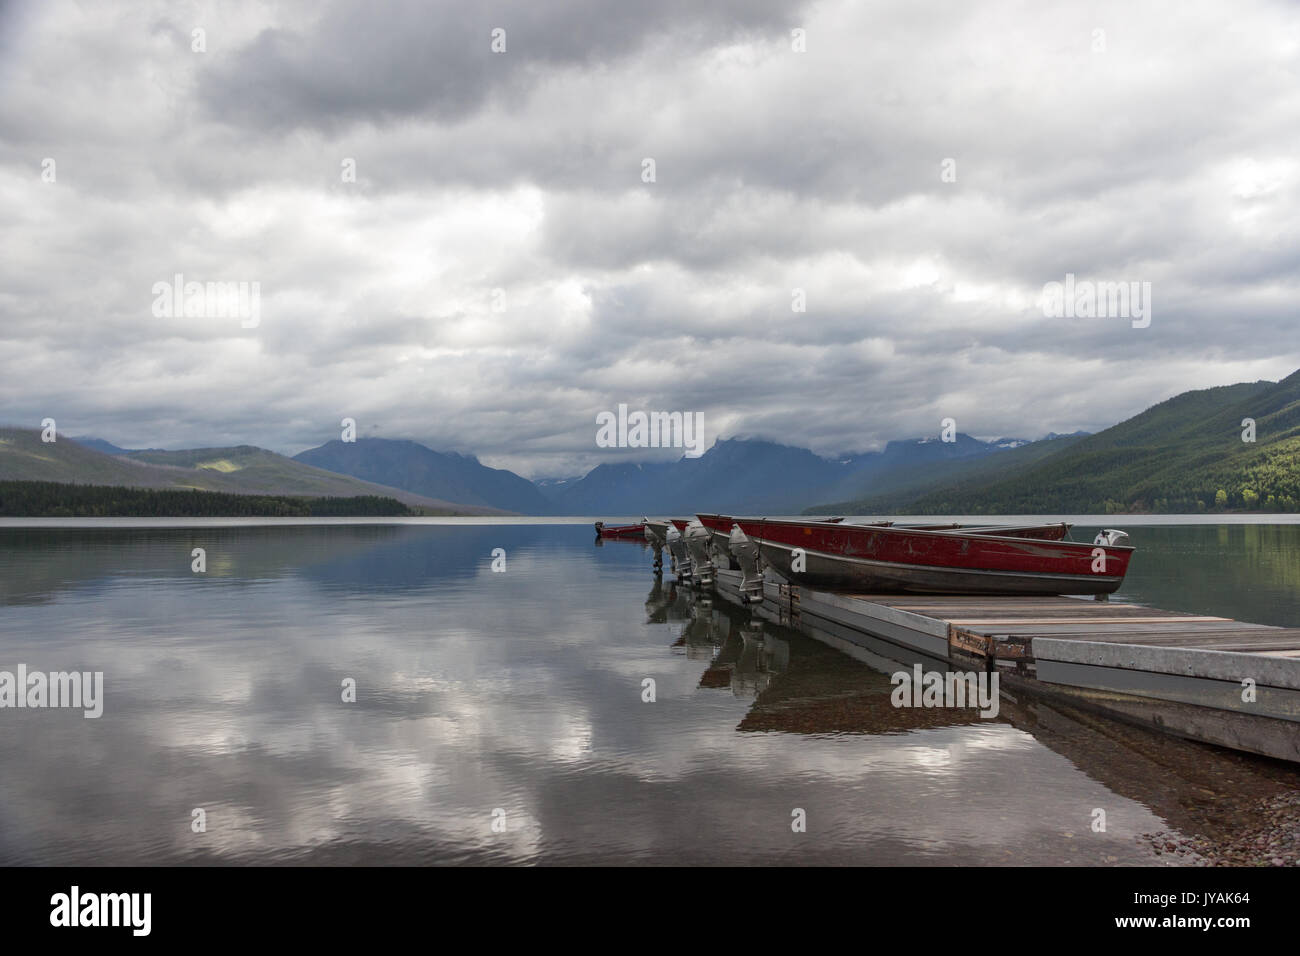 Category:   Boats on the Pier with Mountain-range background and mirror-like Lake McDonald with Cloud reflections Stock Photo